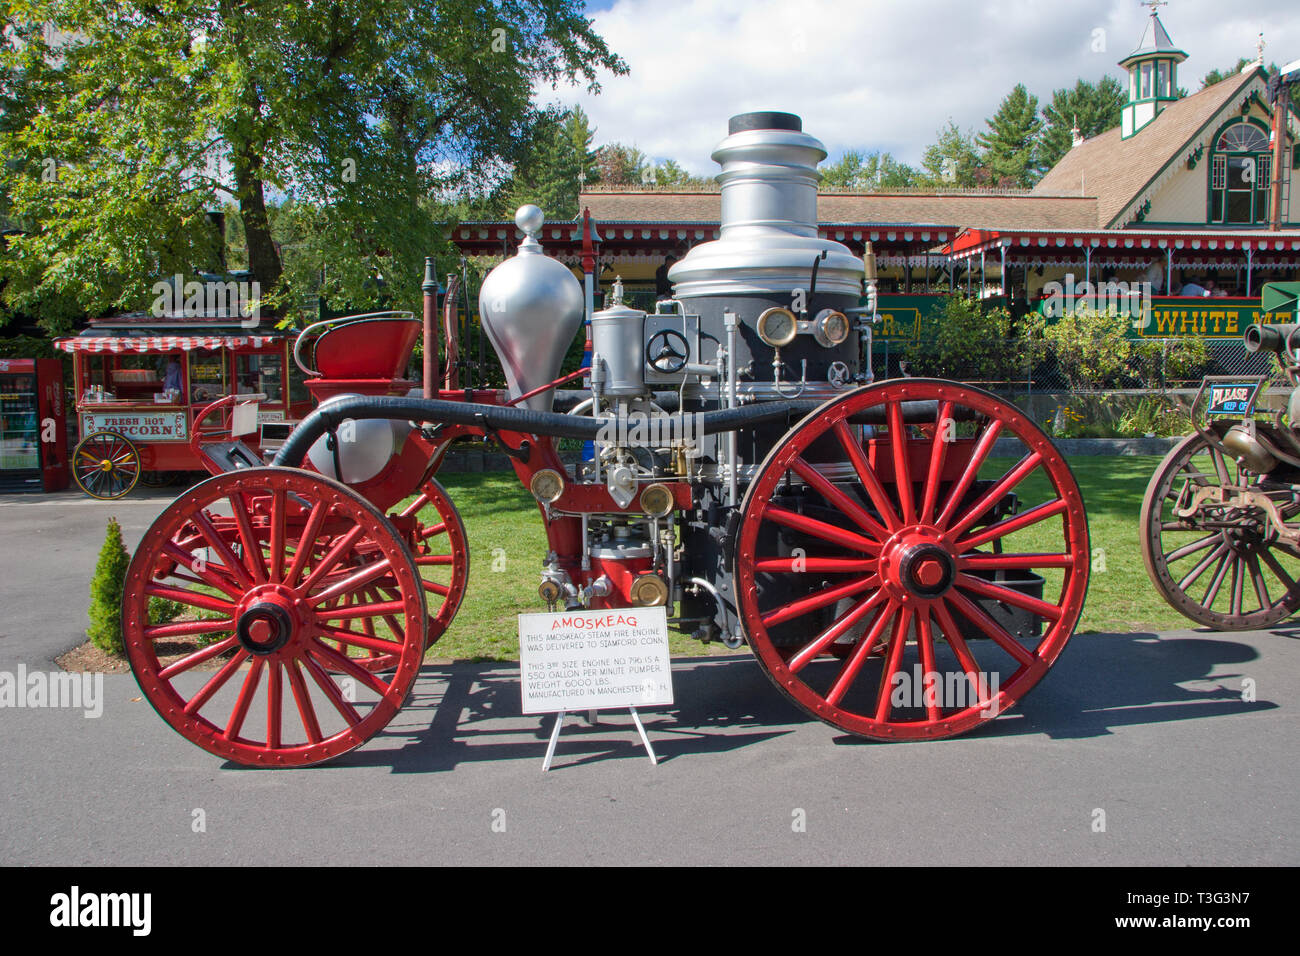 Antique steam fire engine at Clark's Trading Post, Lincoln, NH Stock Photo  - Alamy